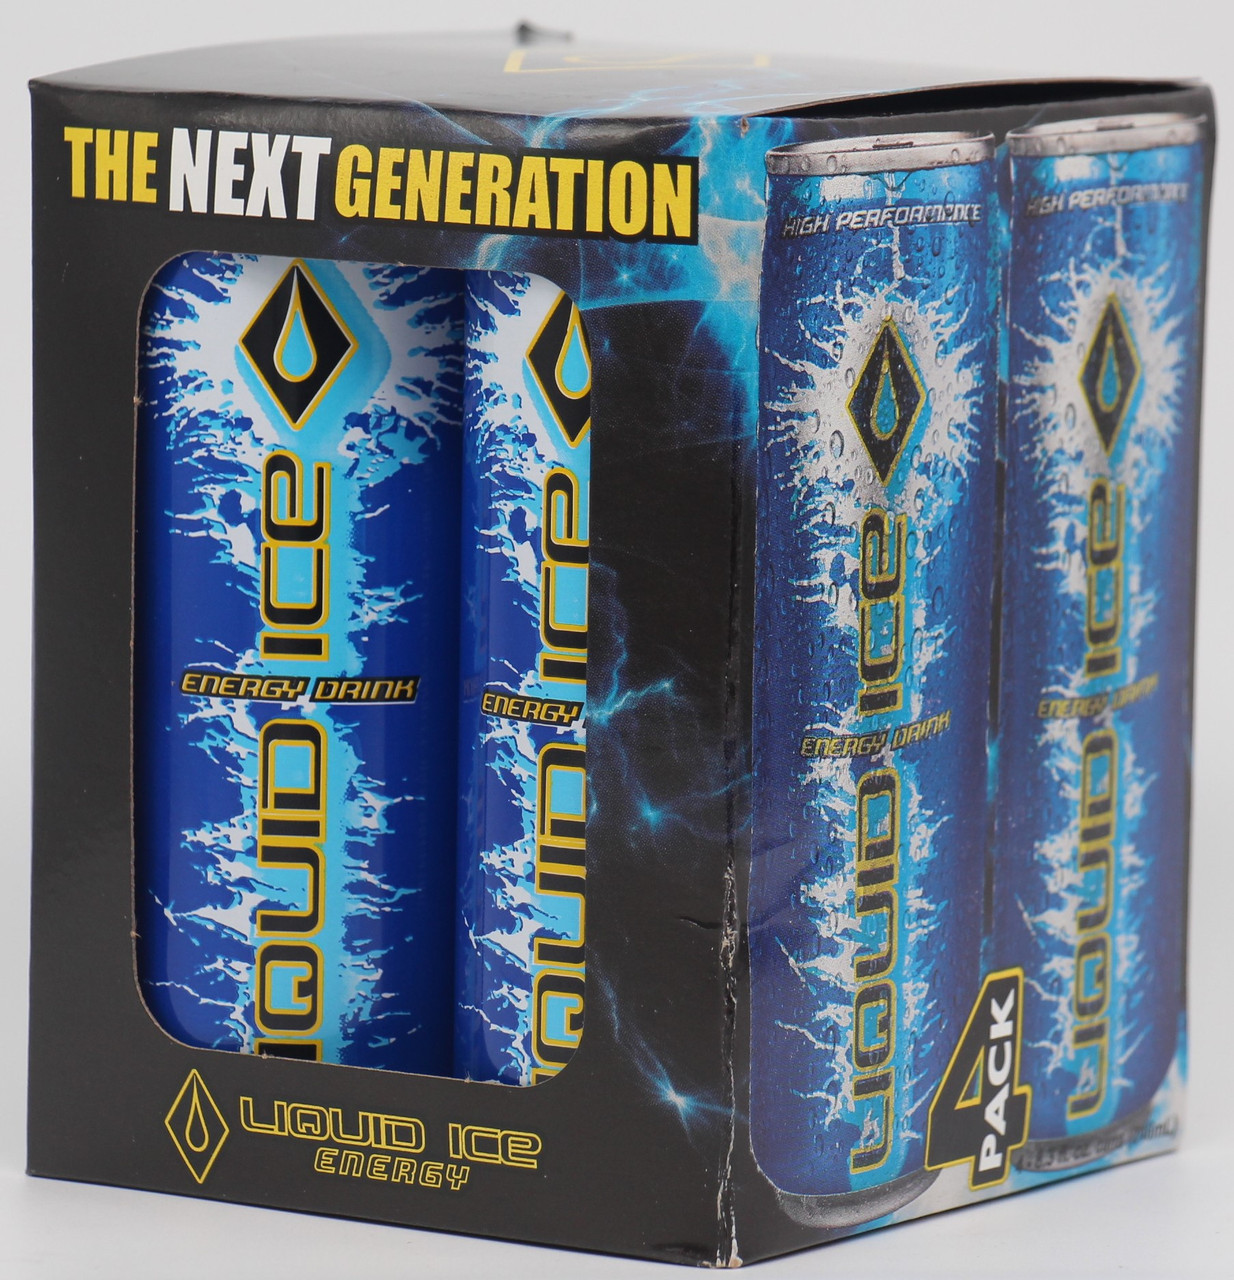 Liquid Ice Energy Drinks: Energize Your Day